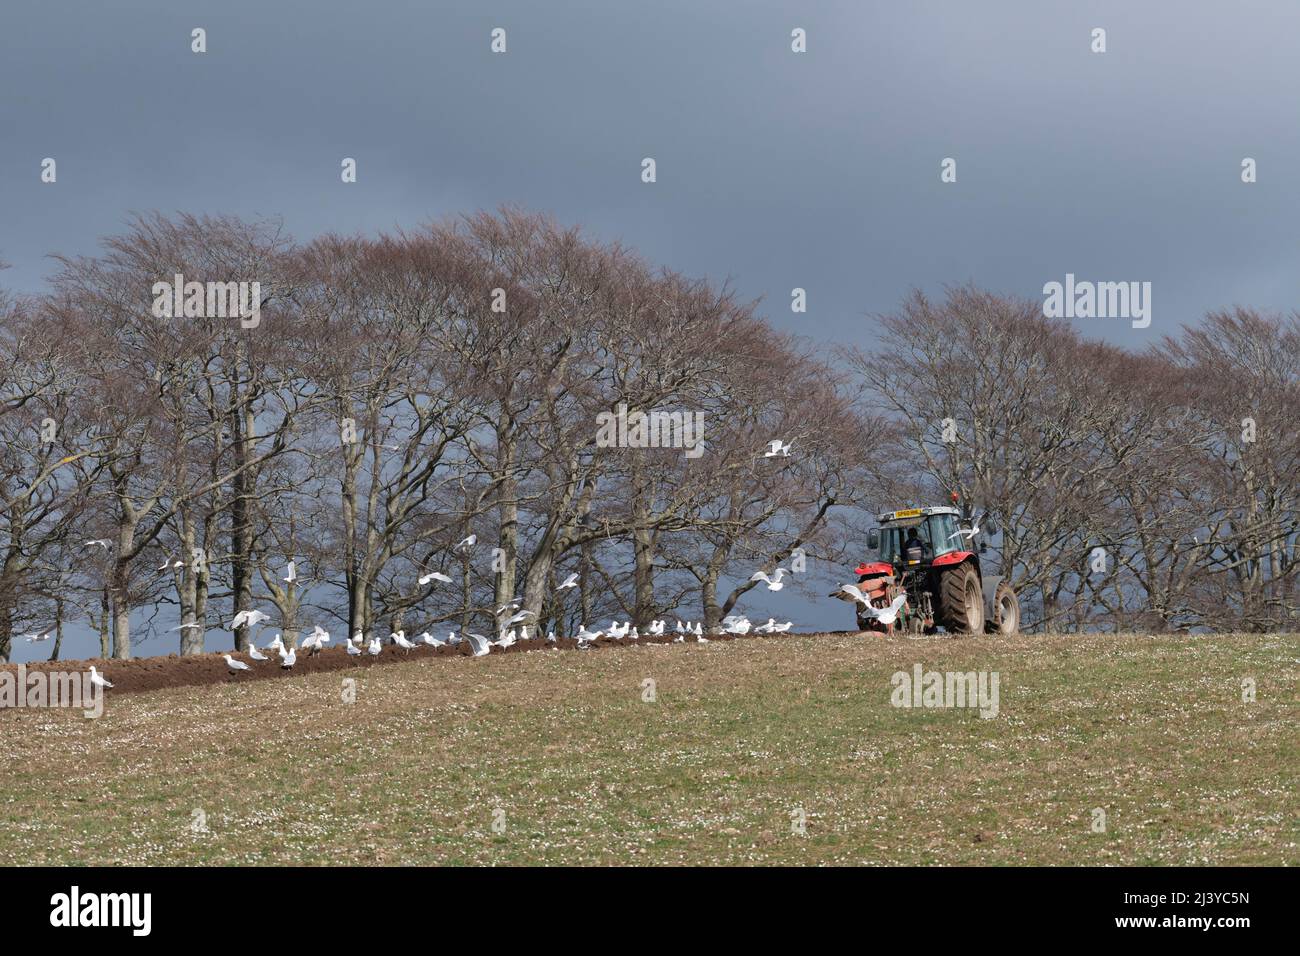 A Flock of Gulls Following a Red Tractor Ploughing a Grassy Field on a Sunny Day Next to a Line of Beech Trees (Fagus Sylvatica) Stock Photo